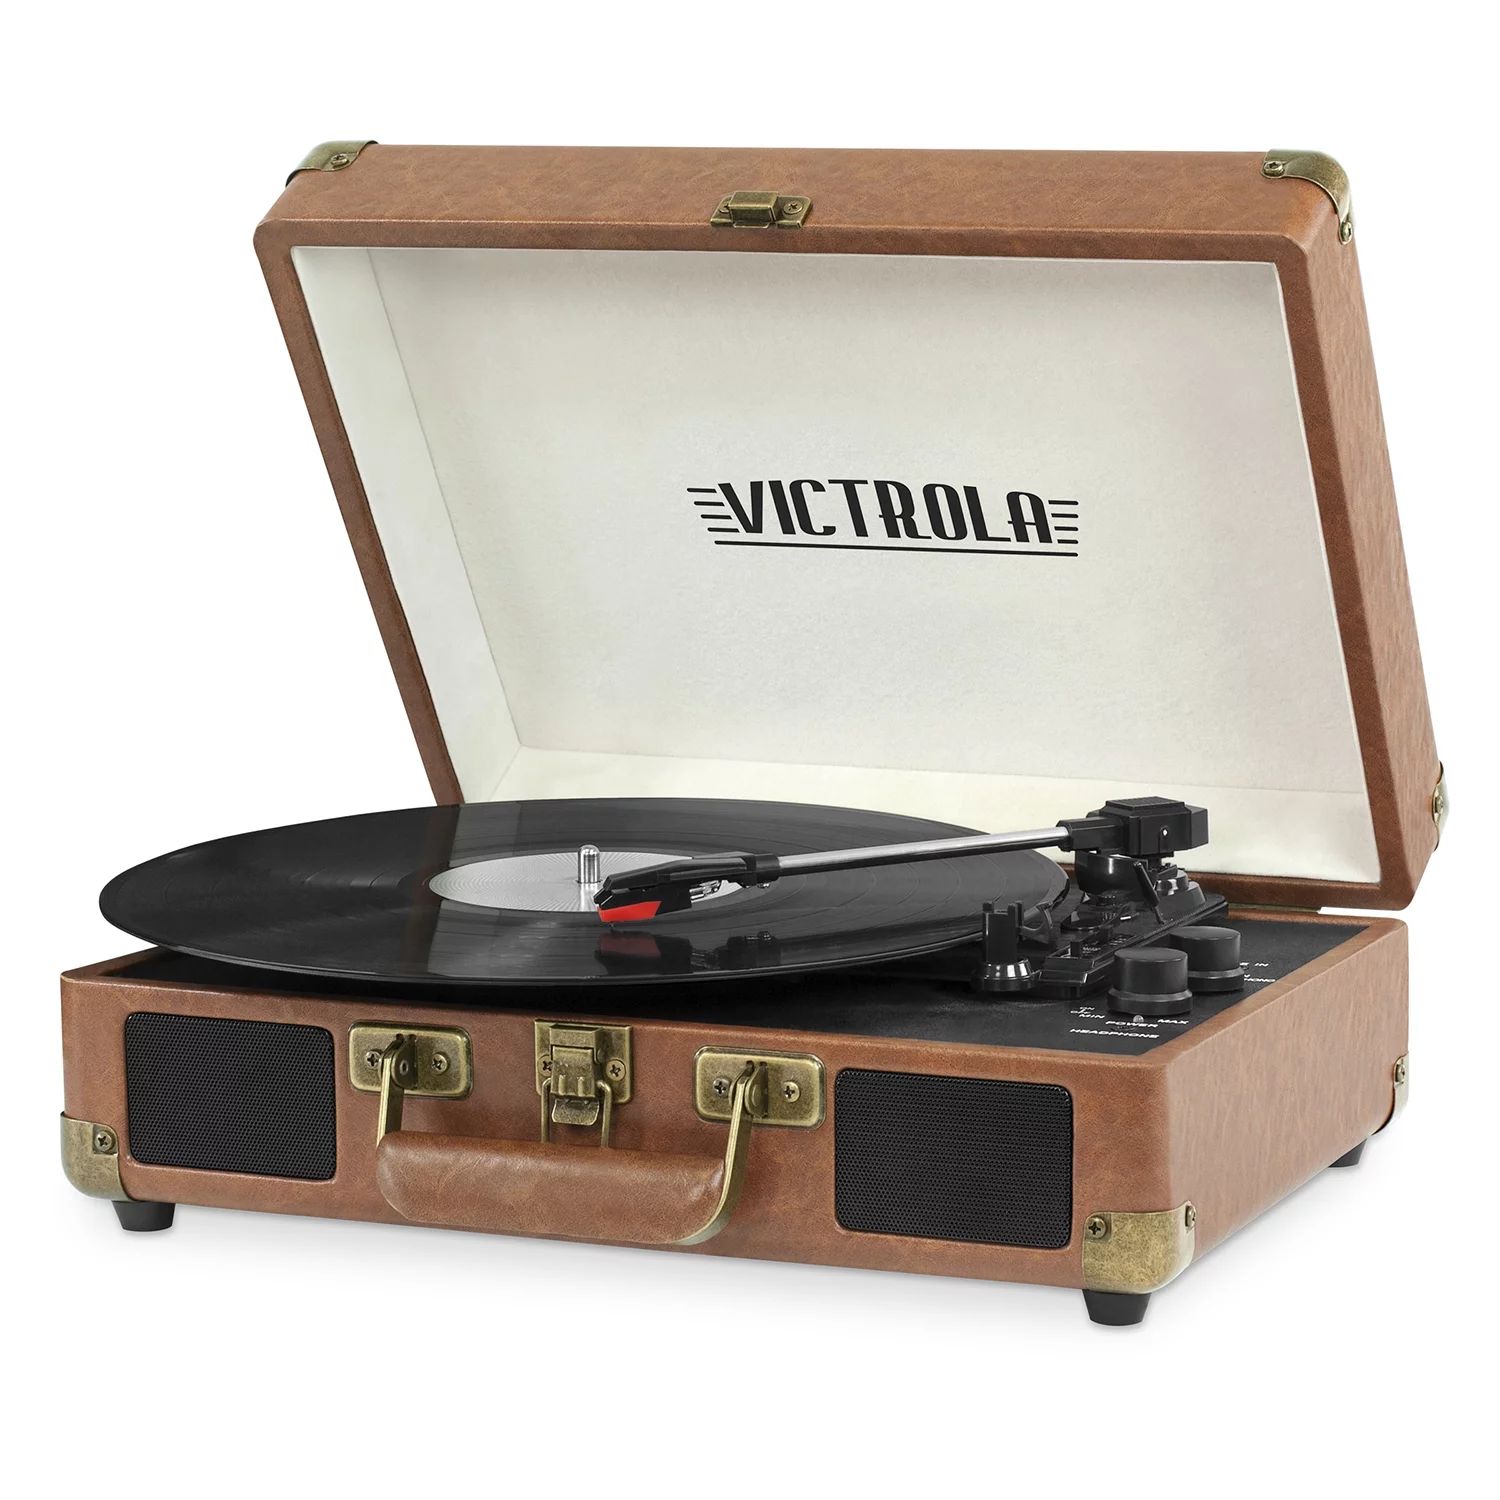 Victrola Bluetooth Portable Suitcase Record Player with 3-speed Turntable - Brown | Walmart (US)